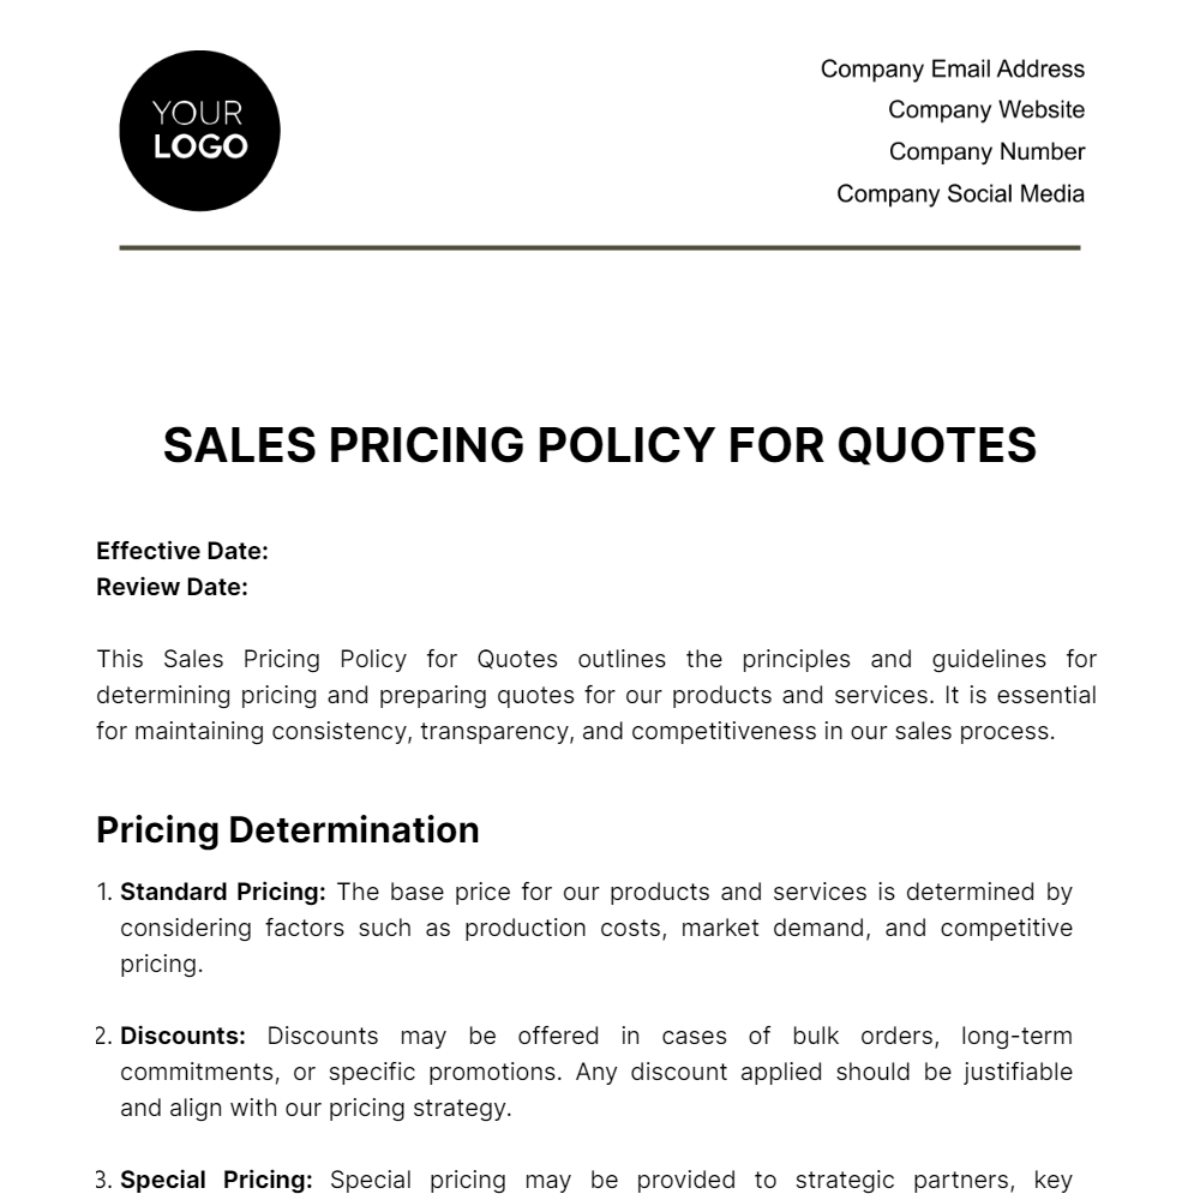 Sales Pricing Policy for Quotes Template